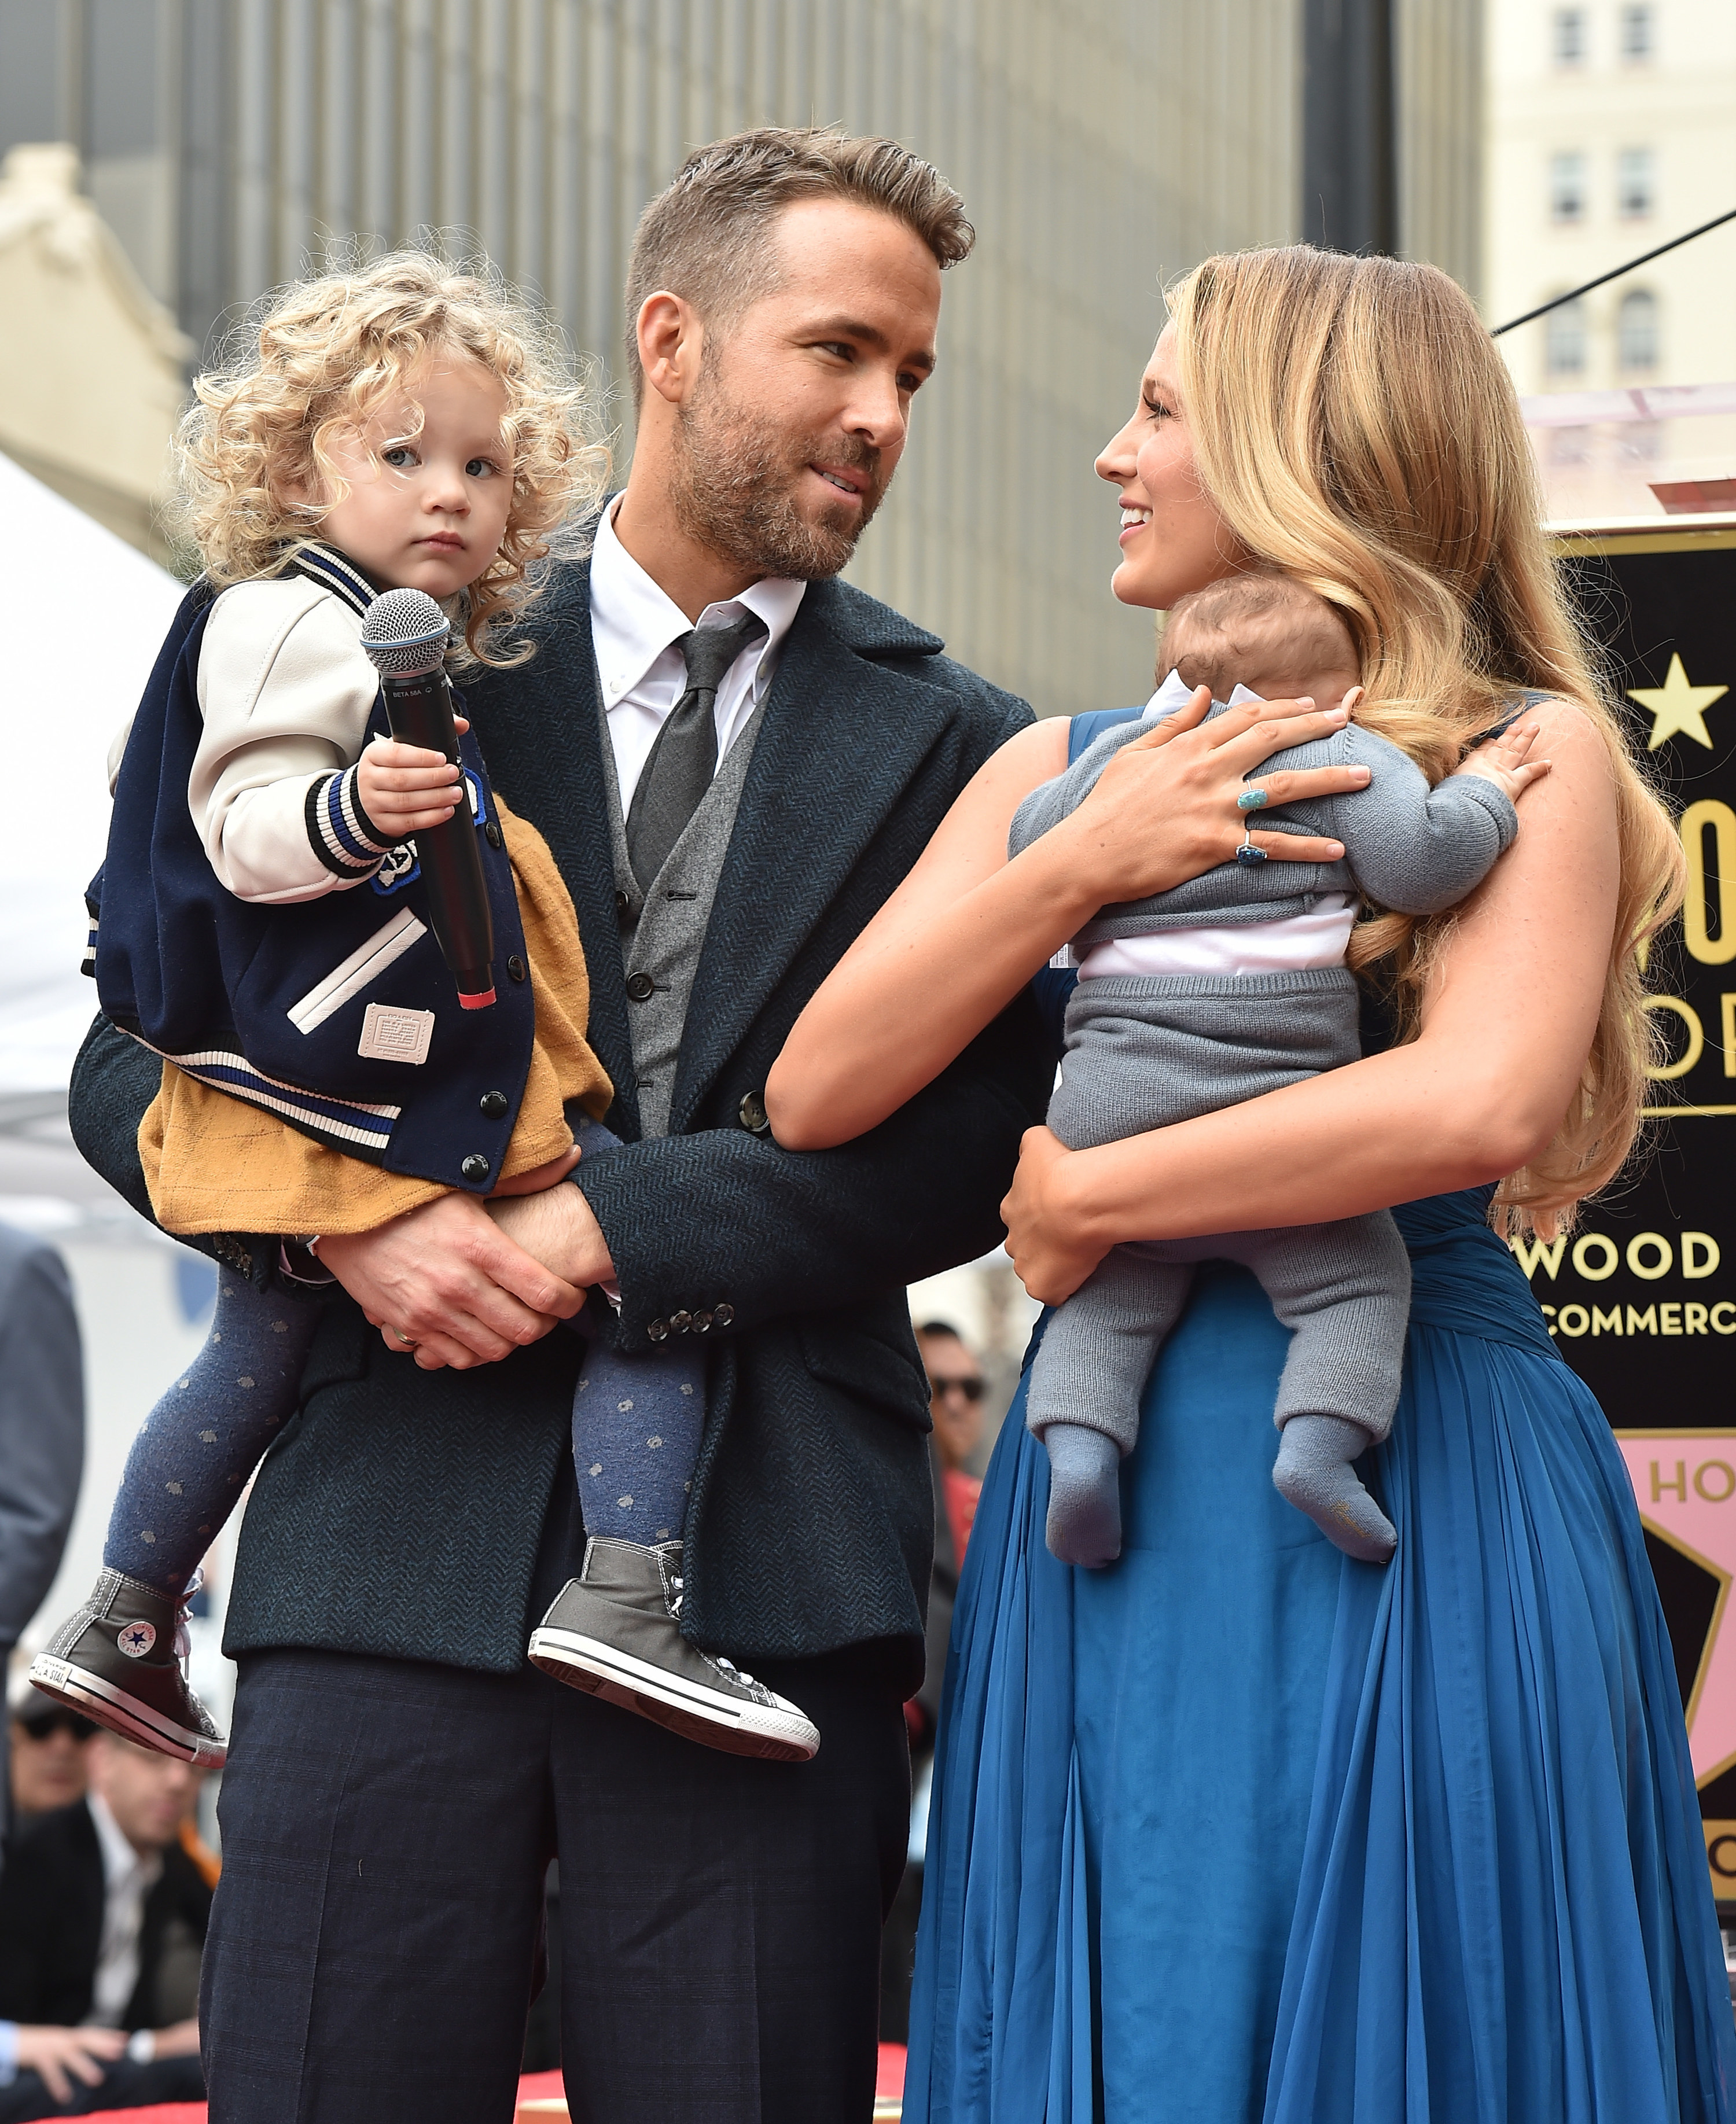 Ryan Reynolds Reveals the Real Reason He's Taking a Break From Acting